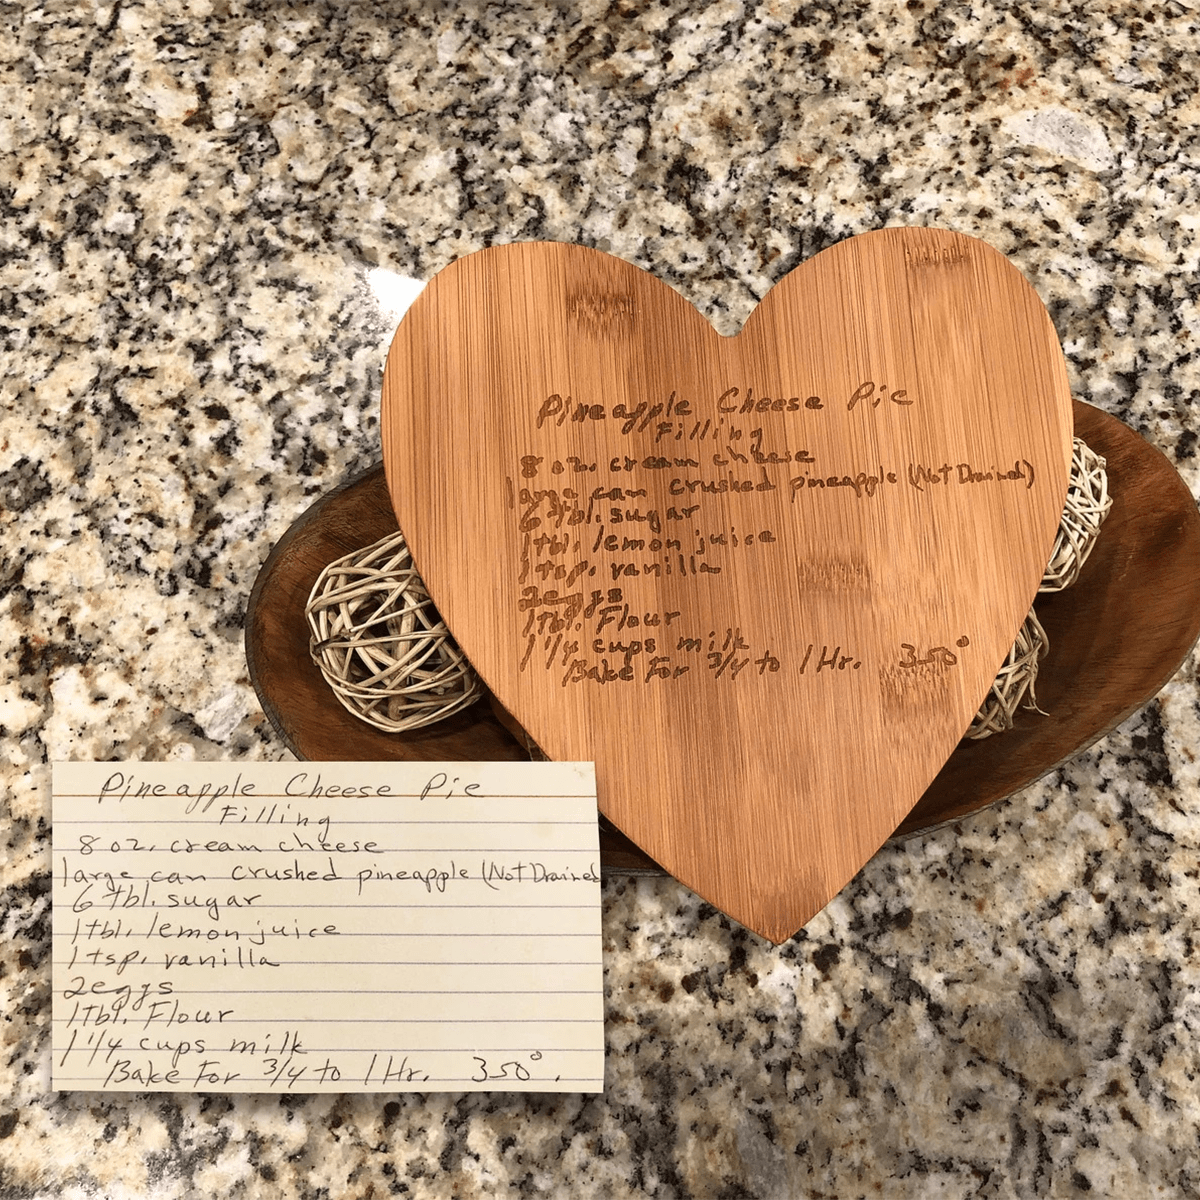 https://www.tasteofhome.com/wp-content/uploads/2022/09/personalized-cutting-board-handwriting-ecomm-via-etsy.com-1.png